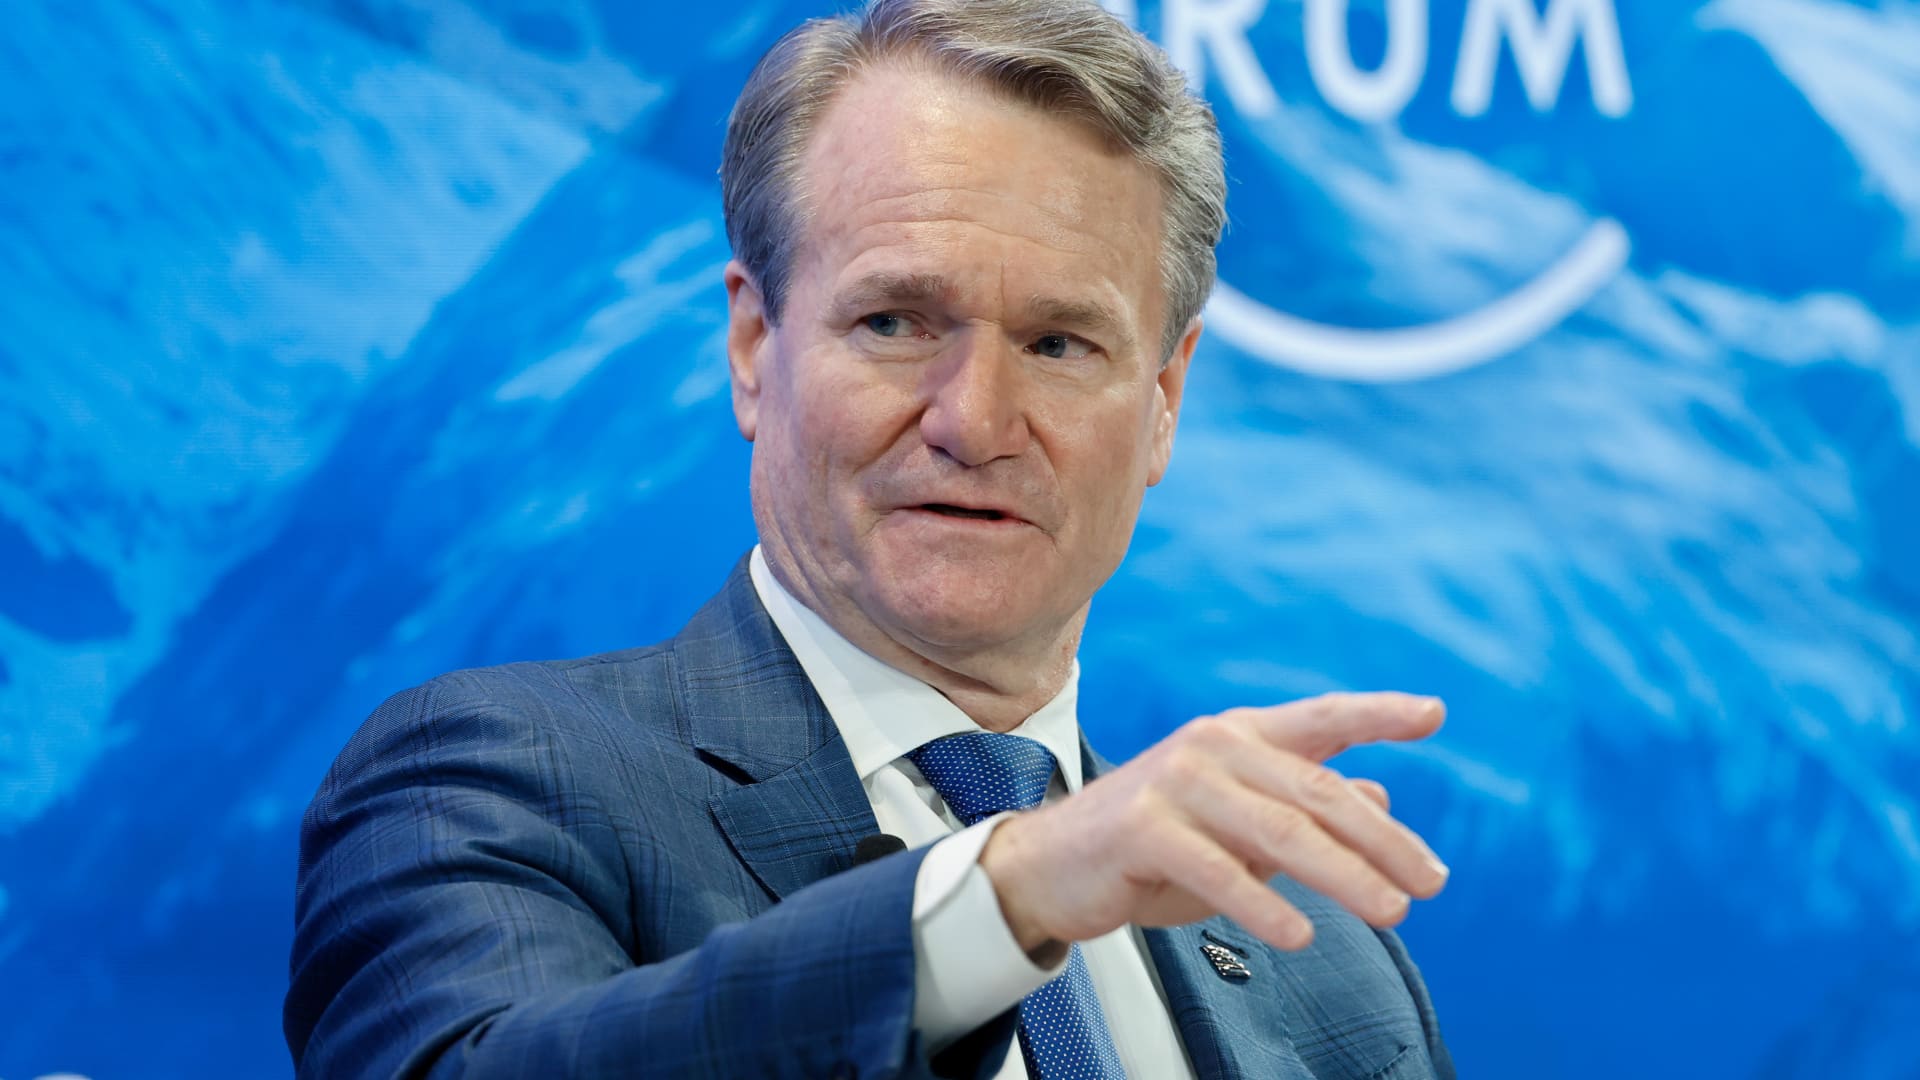 Bank of America CEO says capitalism must be cleaned up